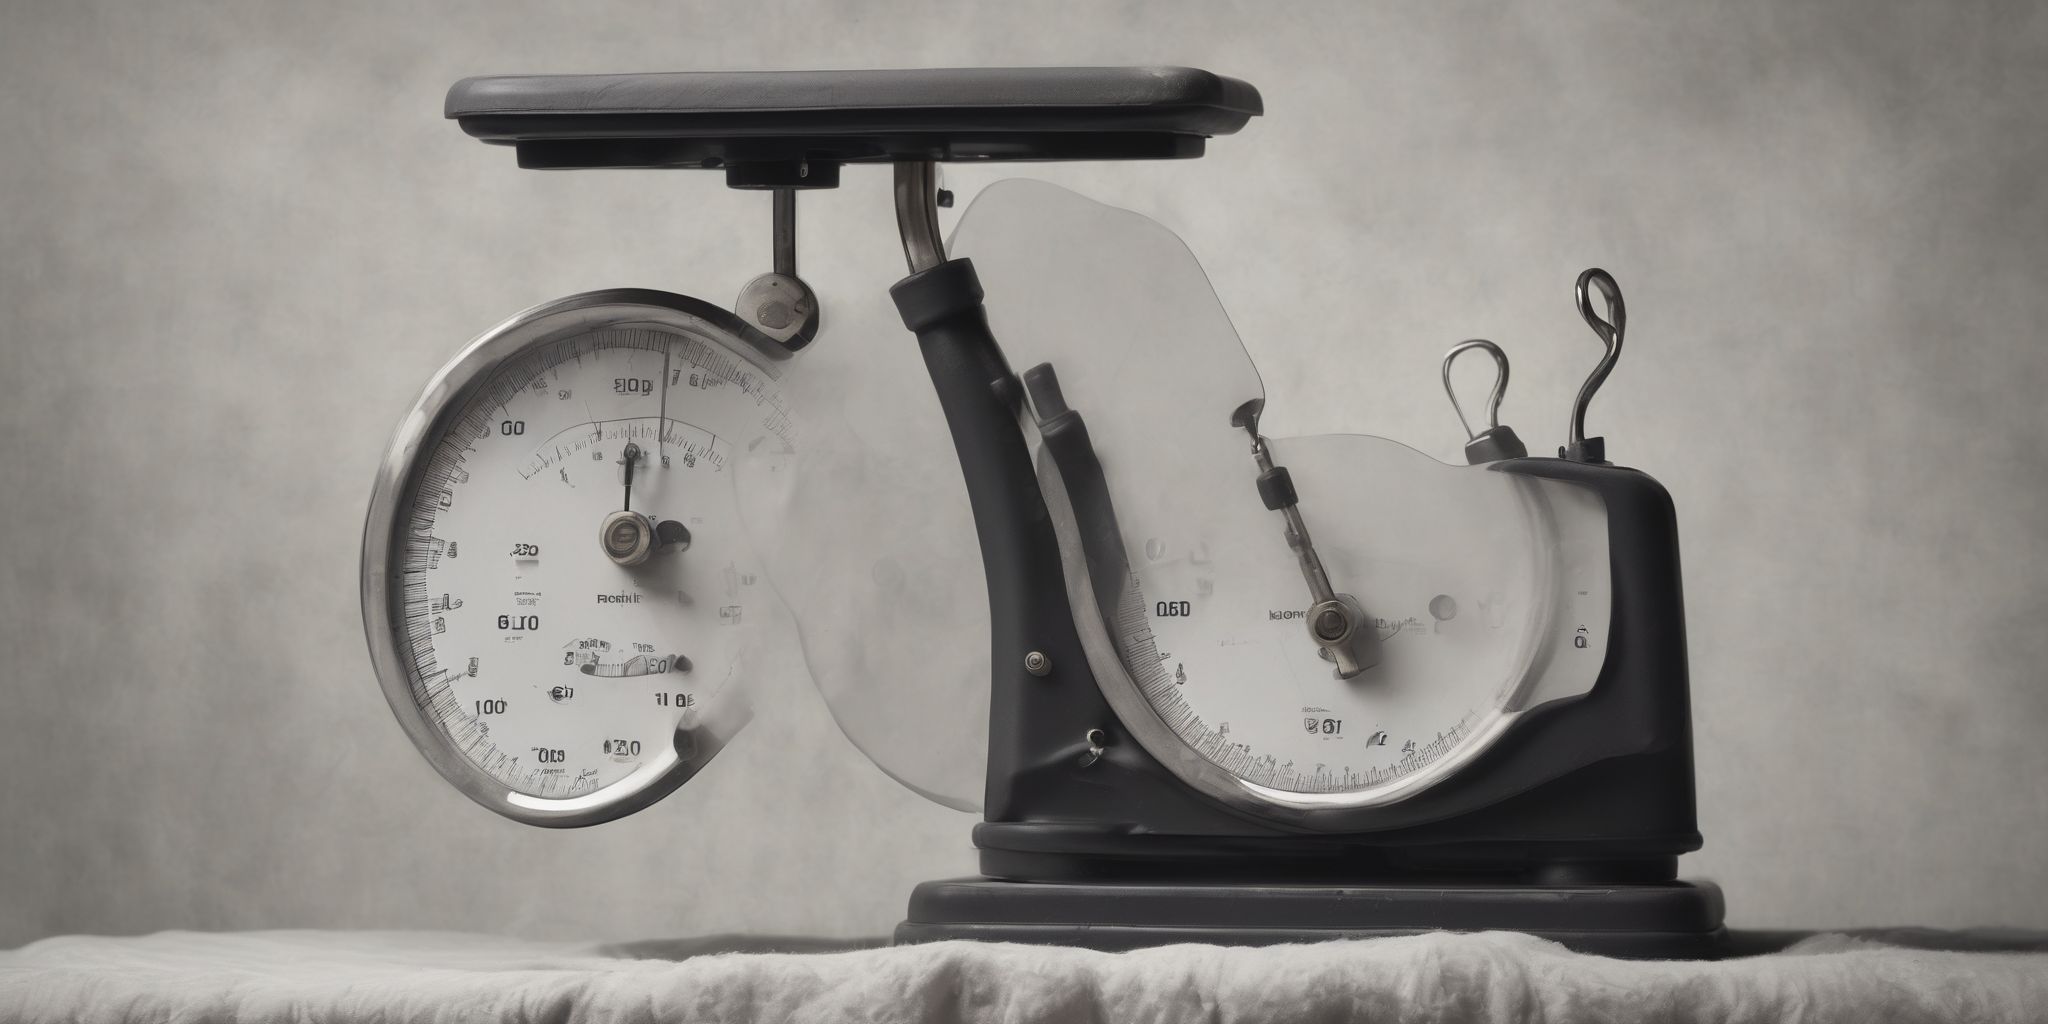 Weighted Scale  in realistic, photographic style